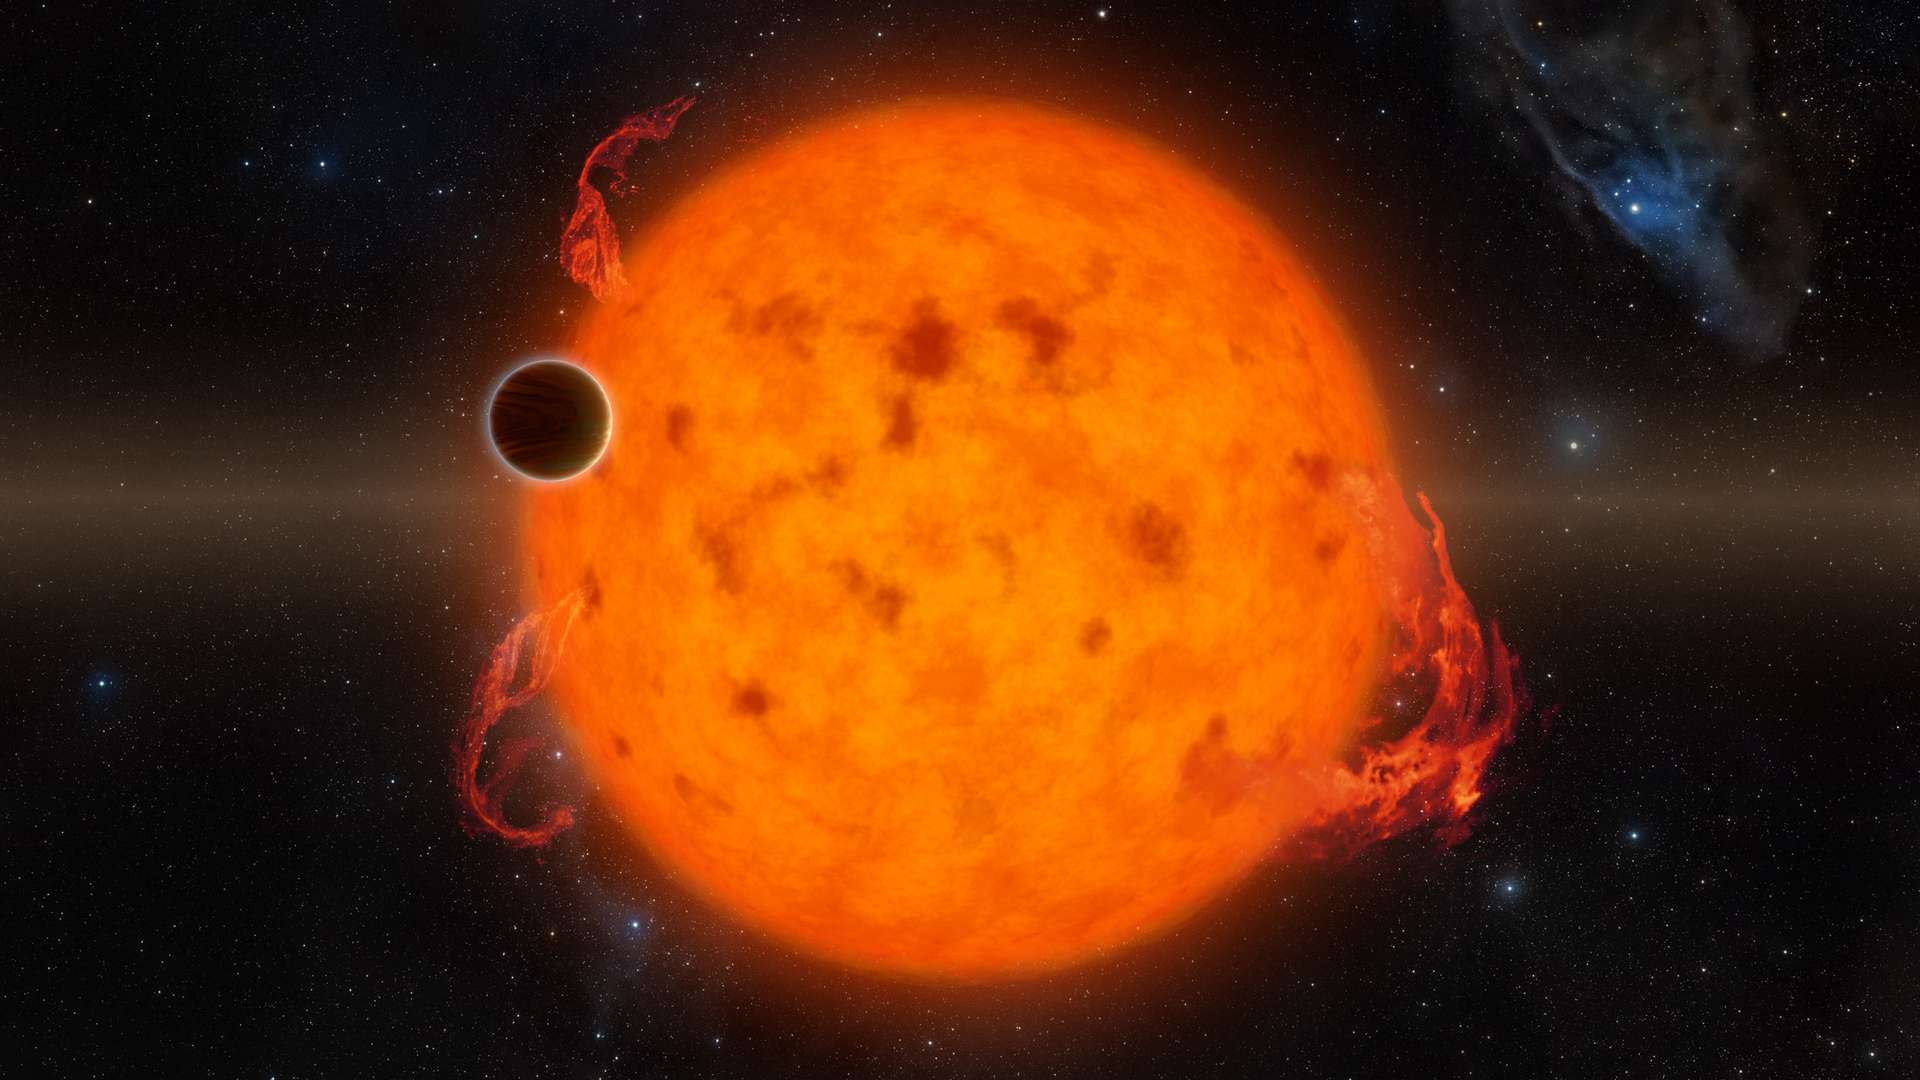 Hubble observed weather changes in the atmosphere of an exoplanet!